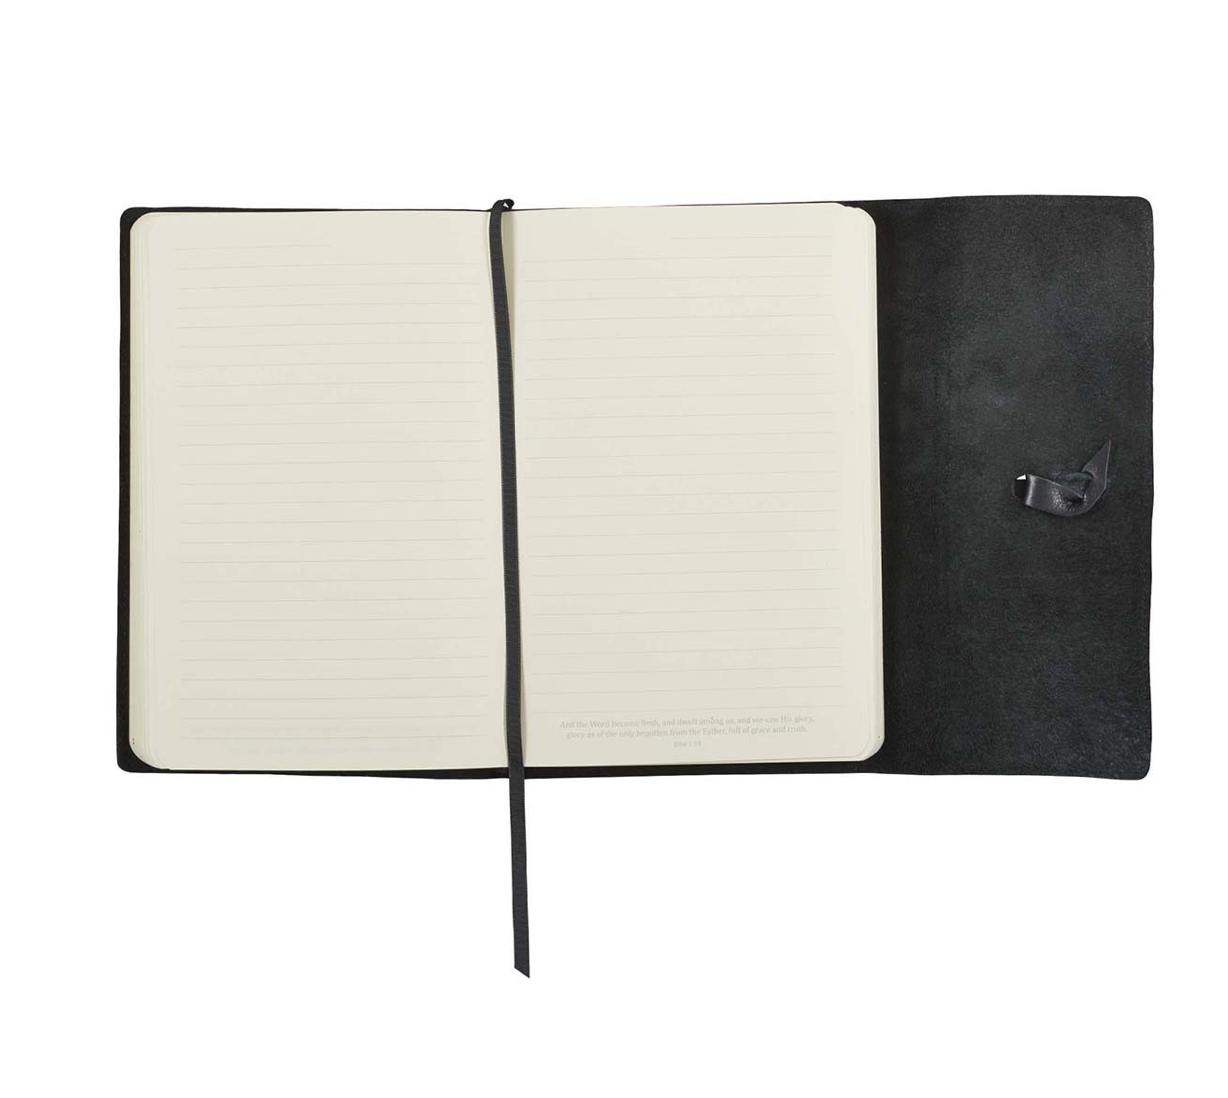 Commit to the Lord Black Full Grain Leather Journal with Wrap Closure - Proverbs 16:3